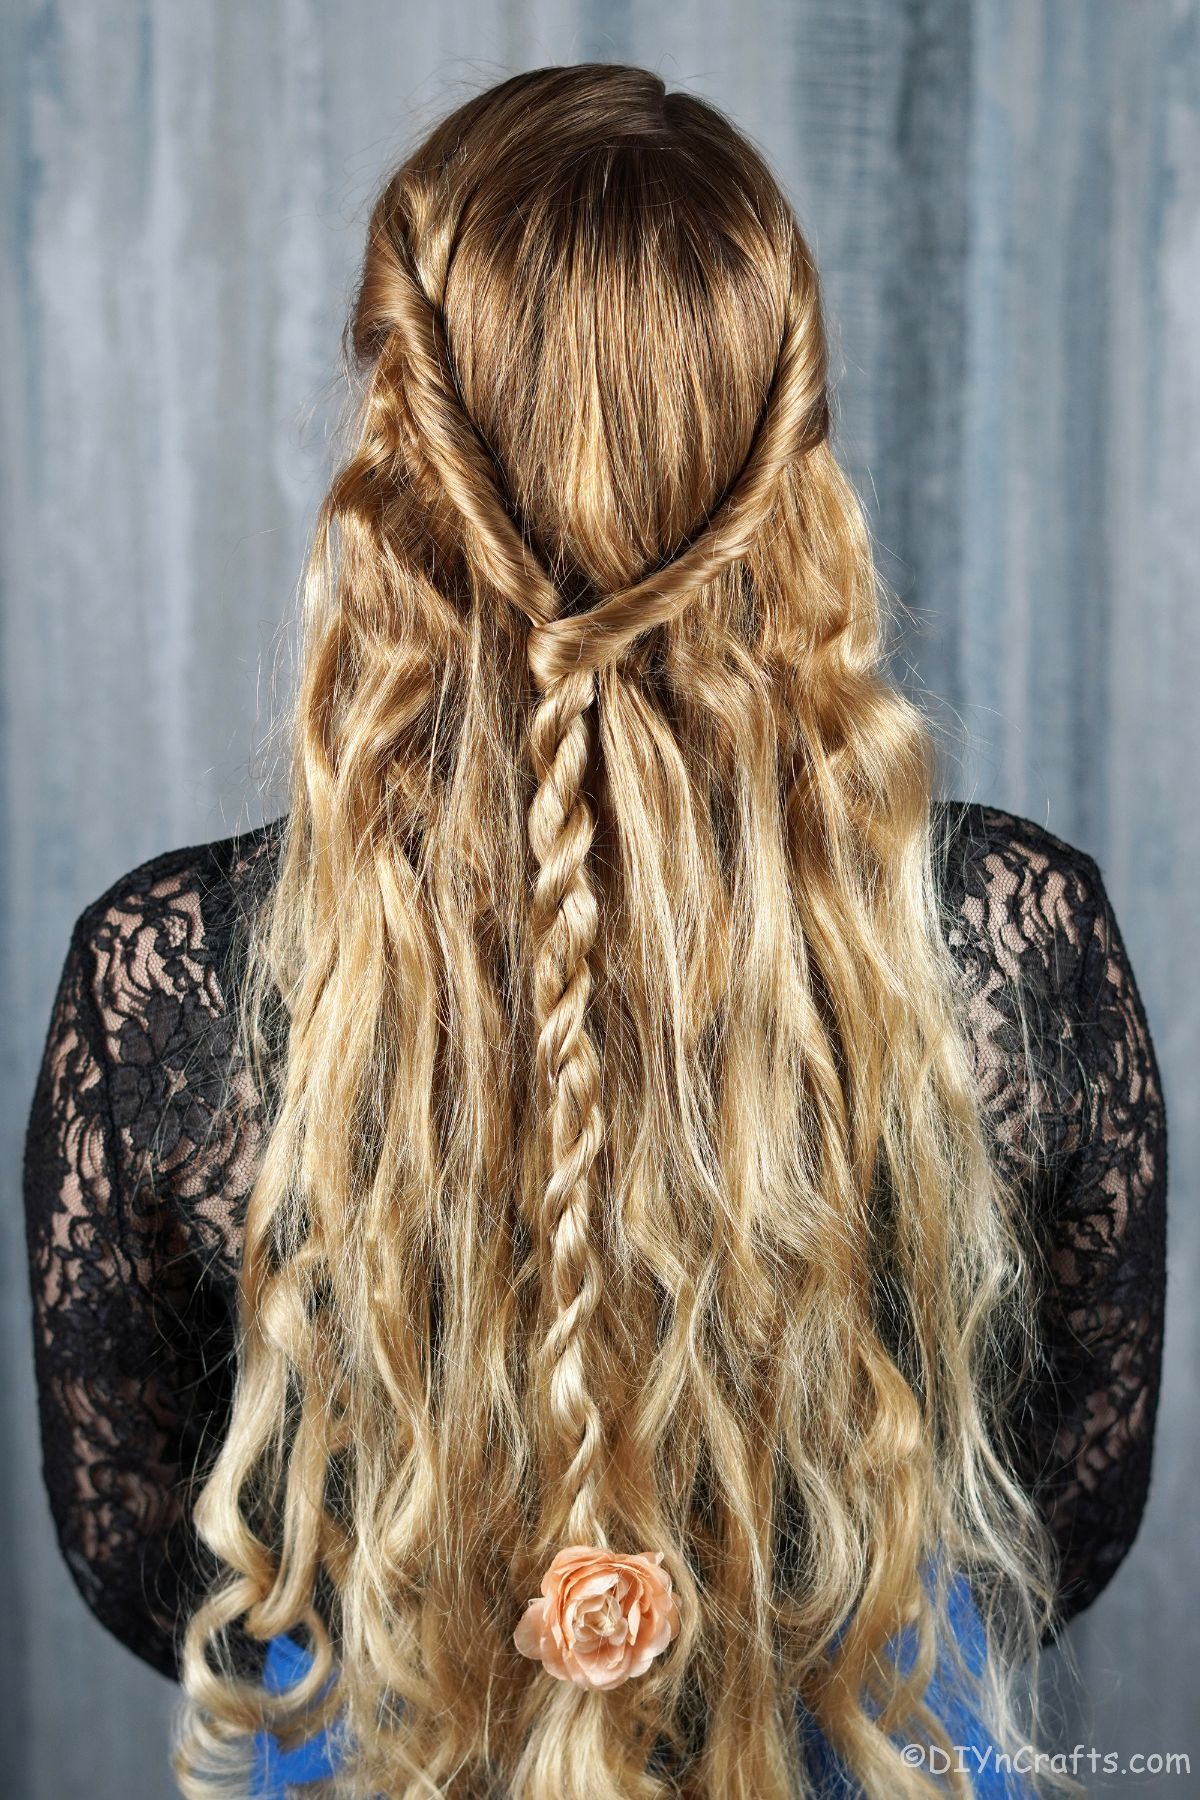 back of half up braided hairstyle on blonde in black shirt